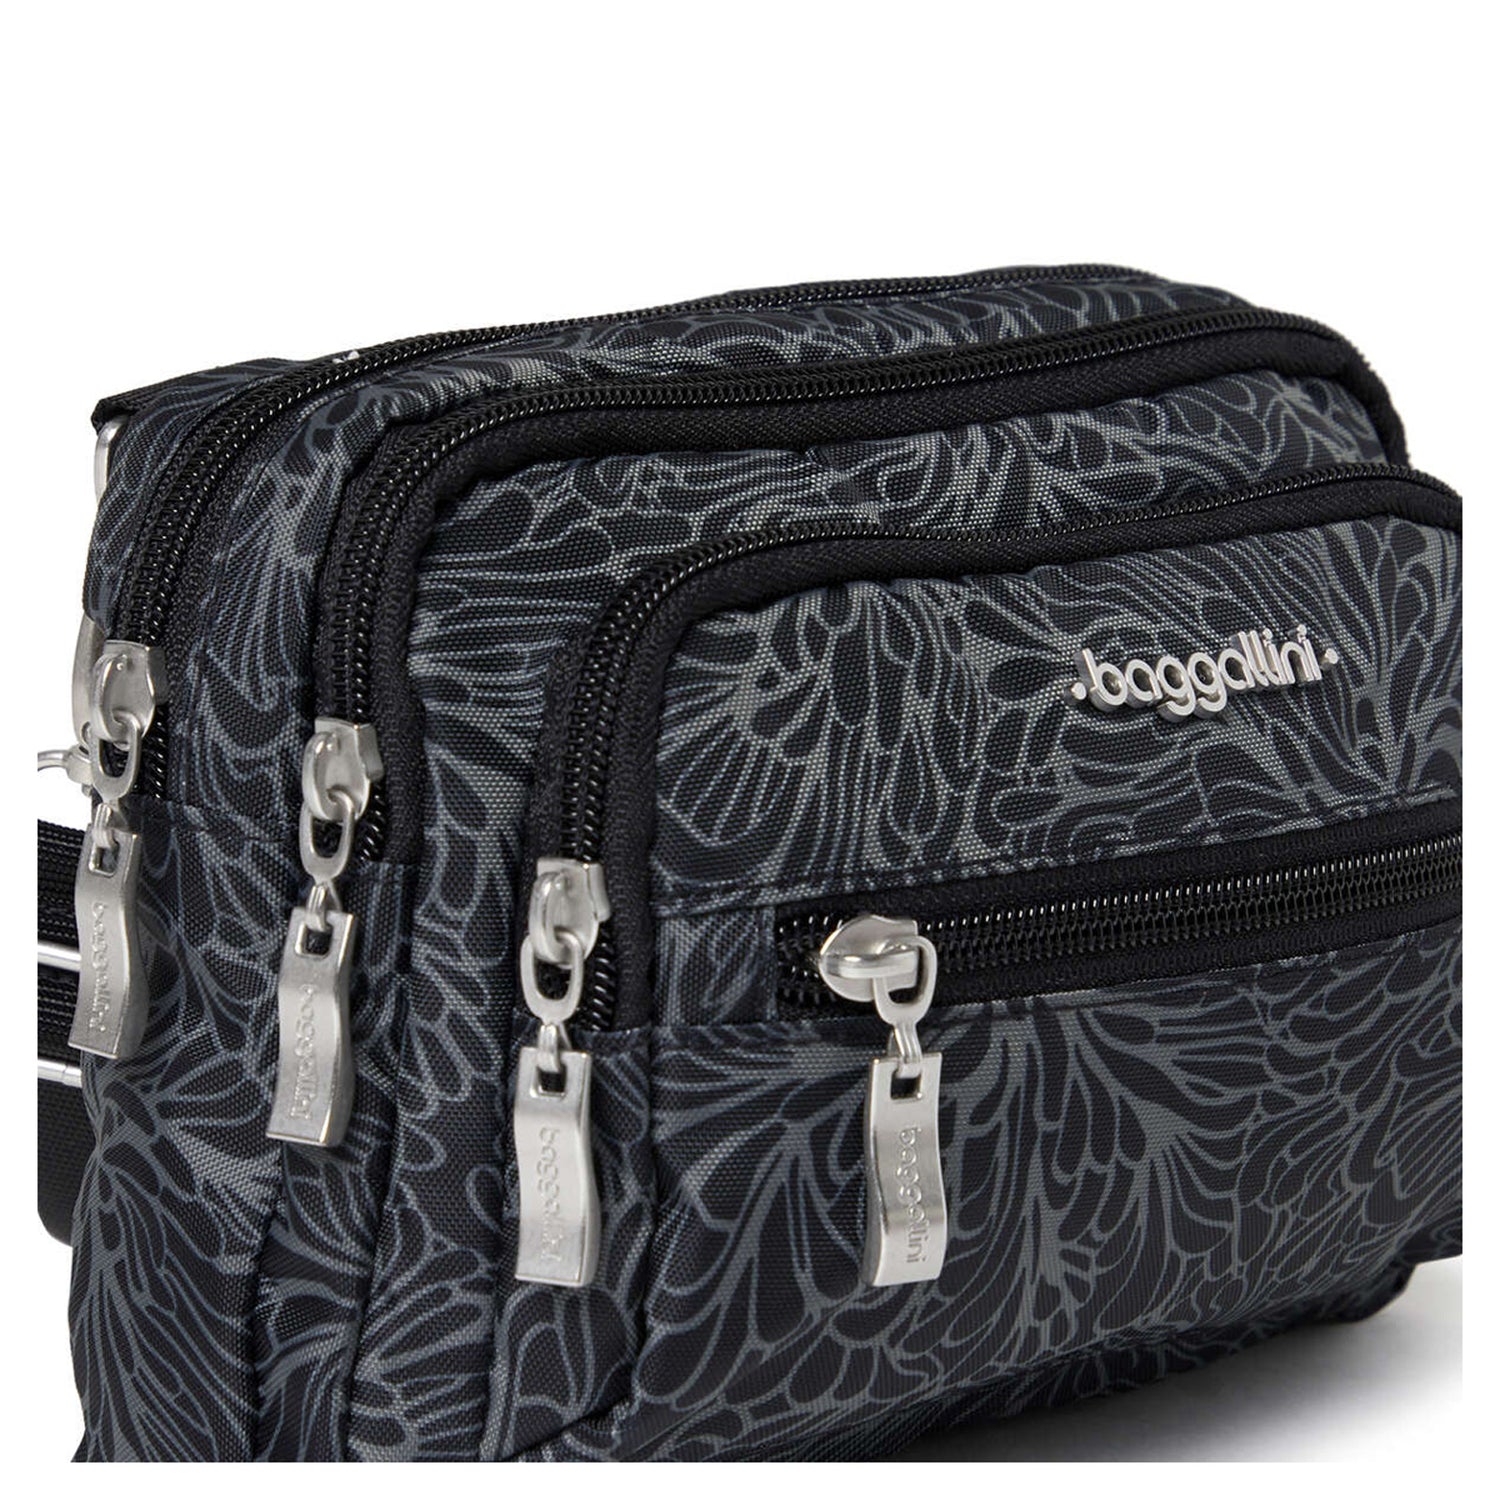 Baggallini The Only Mini Bag